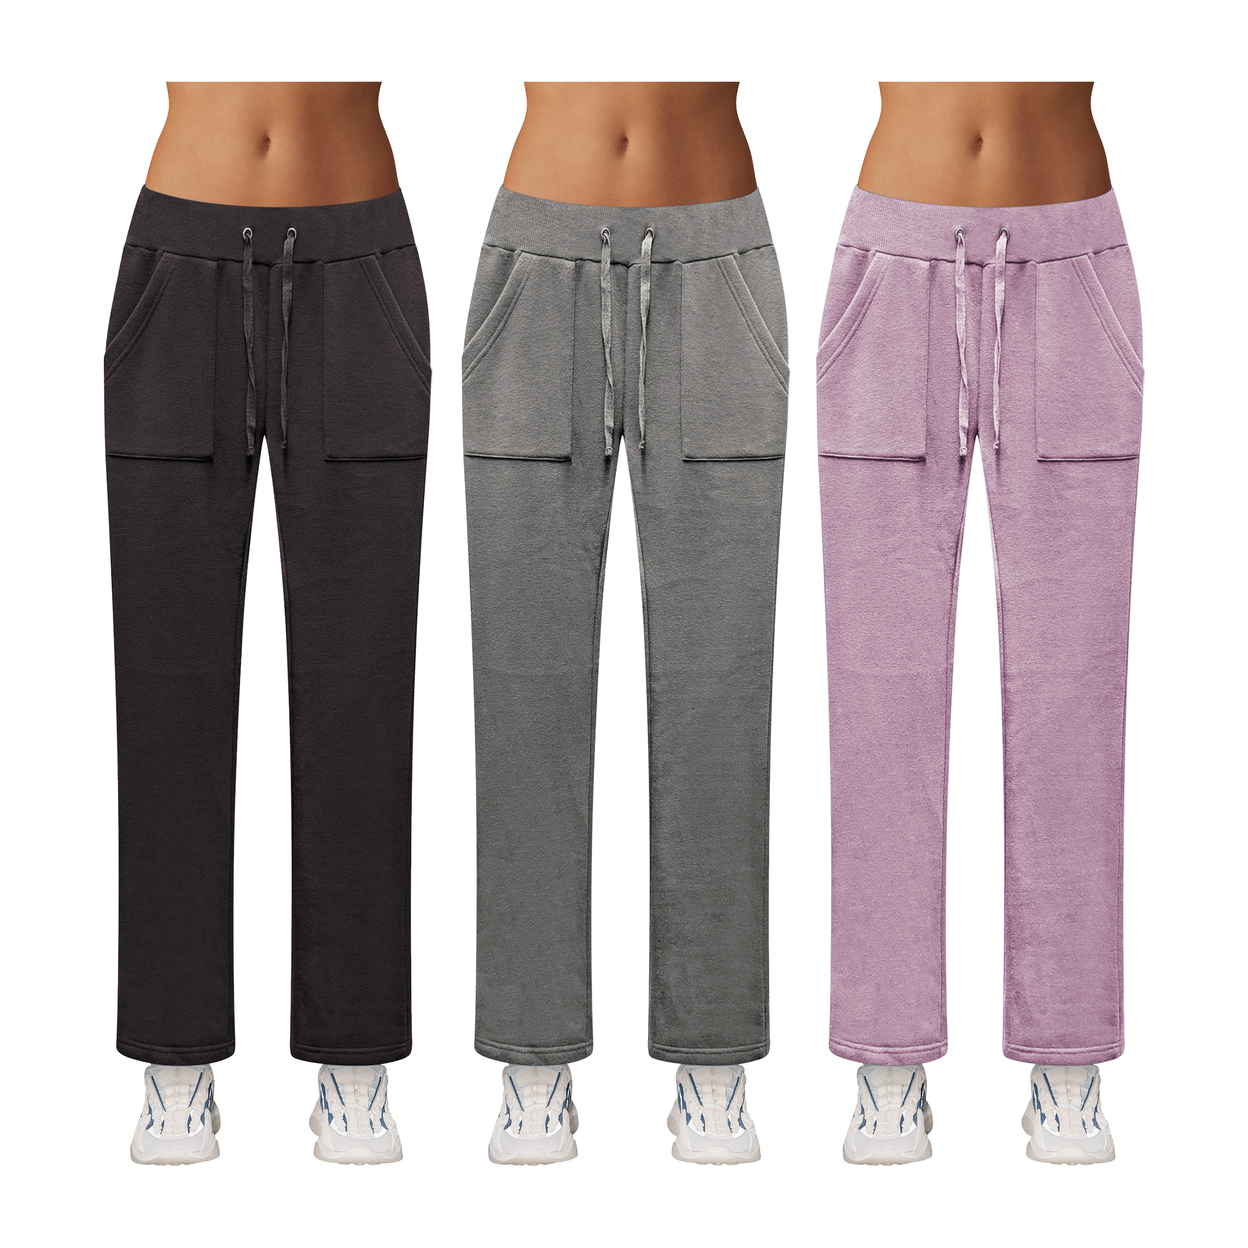 Multi-Pack: Women's Ultra-Soft Cozy Fleece Lined Elastic Waistband Terry Knit Pants - 3-pack, Small